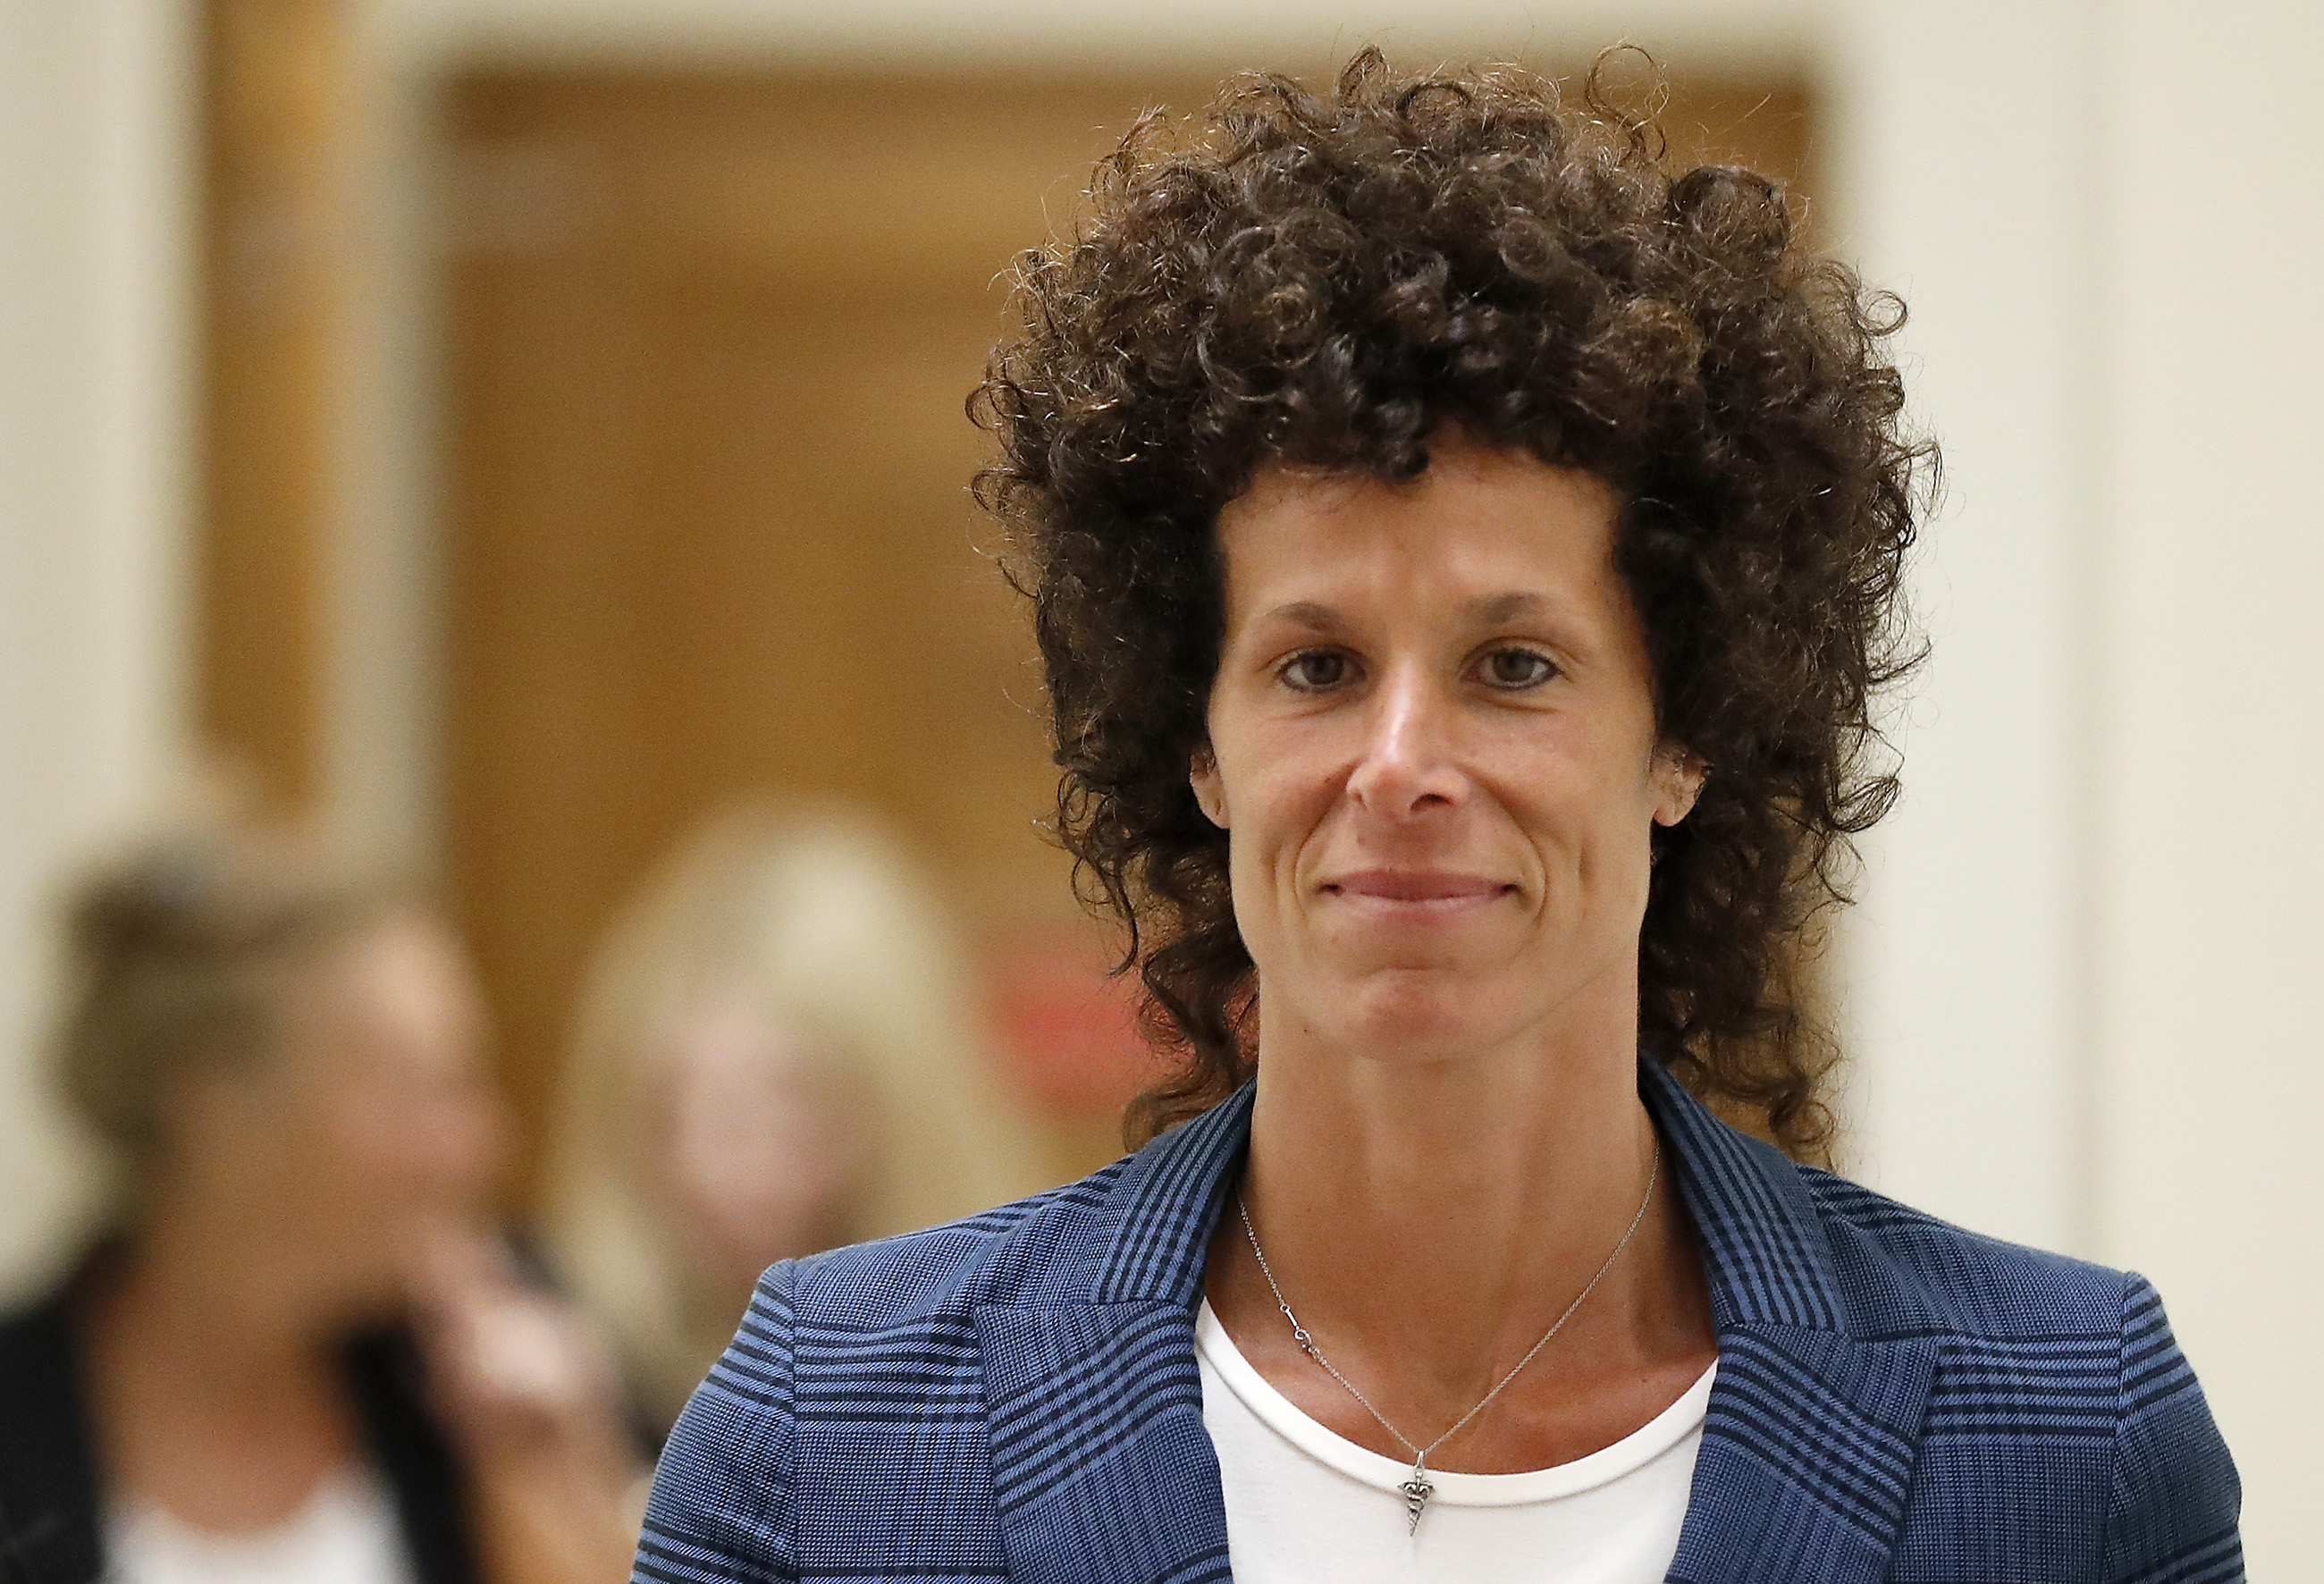 Bill Cosbys accuser Andrea Constand leaves the courtroom after closing arguments in the Cosby trial at the Montgomery County Courthouse in Norristown, Pennsylvania on June 12, 2017. 
                      Cosby's lawyers called just one witness and wrapped their defense of the disgraced US comedian in minutes Monday as the former megastar declined to take the stand at his Pennsylvania sexual assault trial. / AFP PHOTO / POOL / David MAIALETTI        (Photo credit should read DAVID MAIALETTI/AFP/Getty Images) (AFP&mdash;AFP/Getty Images)